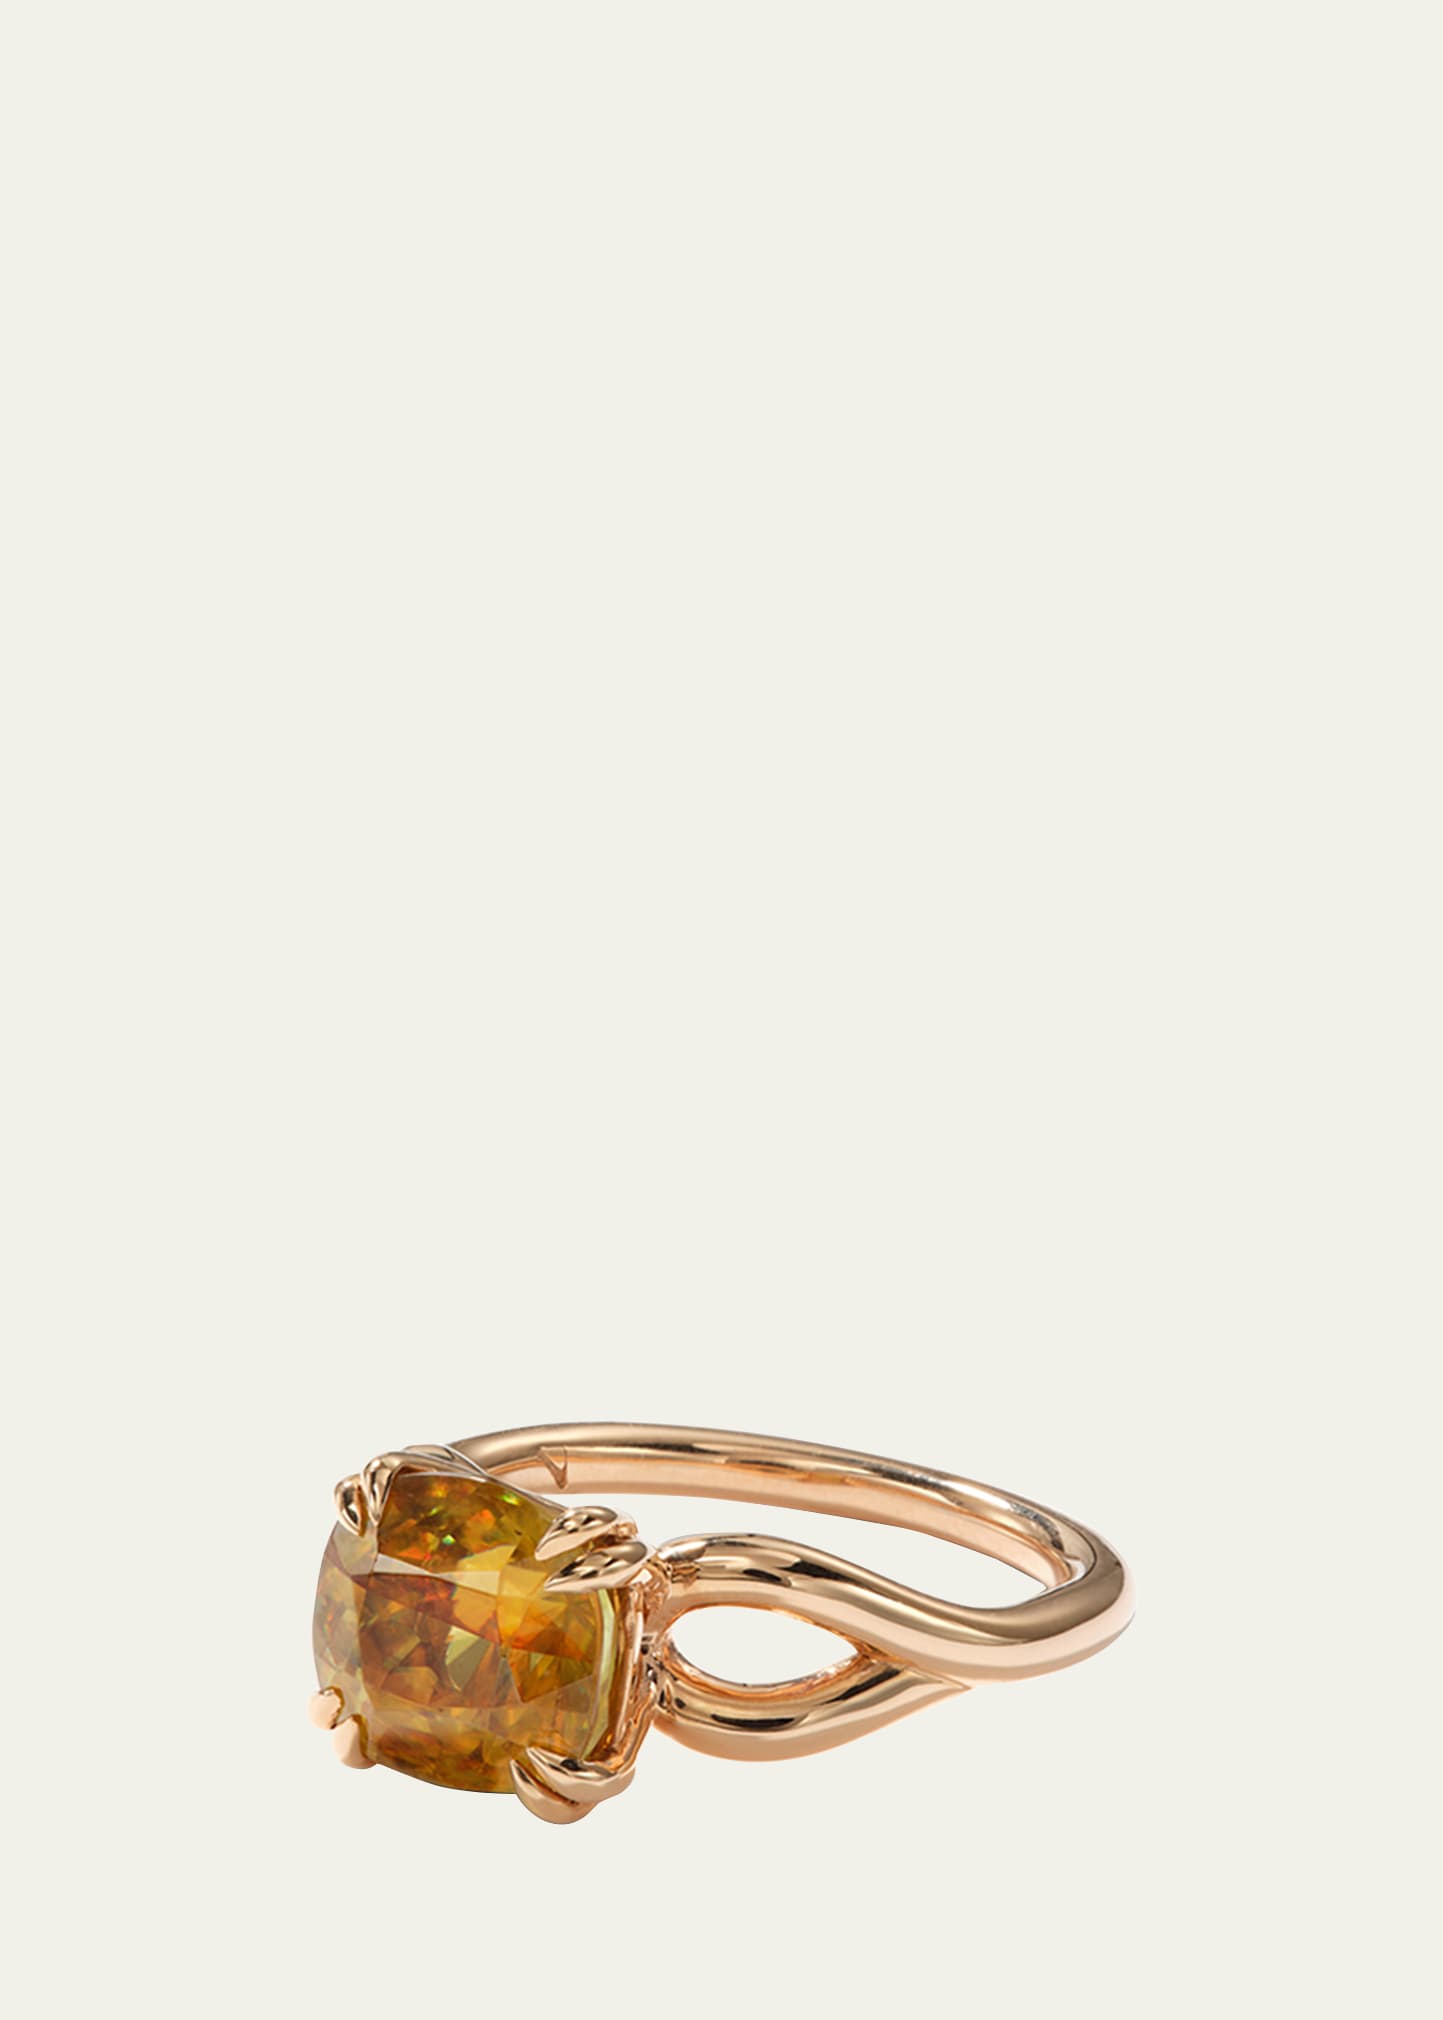 20K Rose Gold Languid Solitaire Ring with Sphene